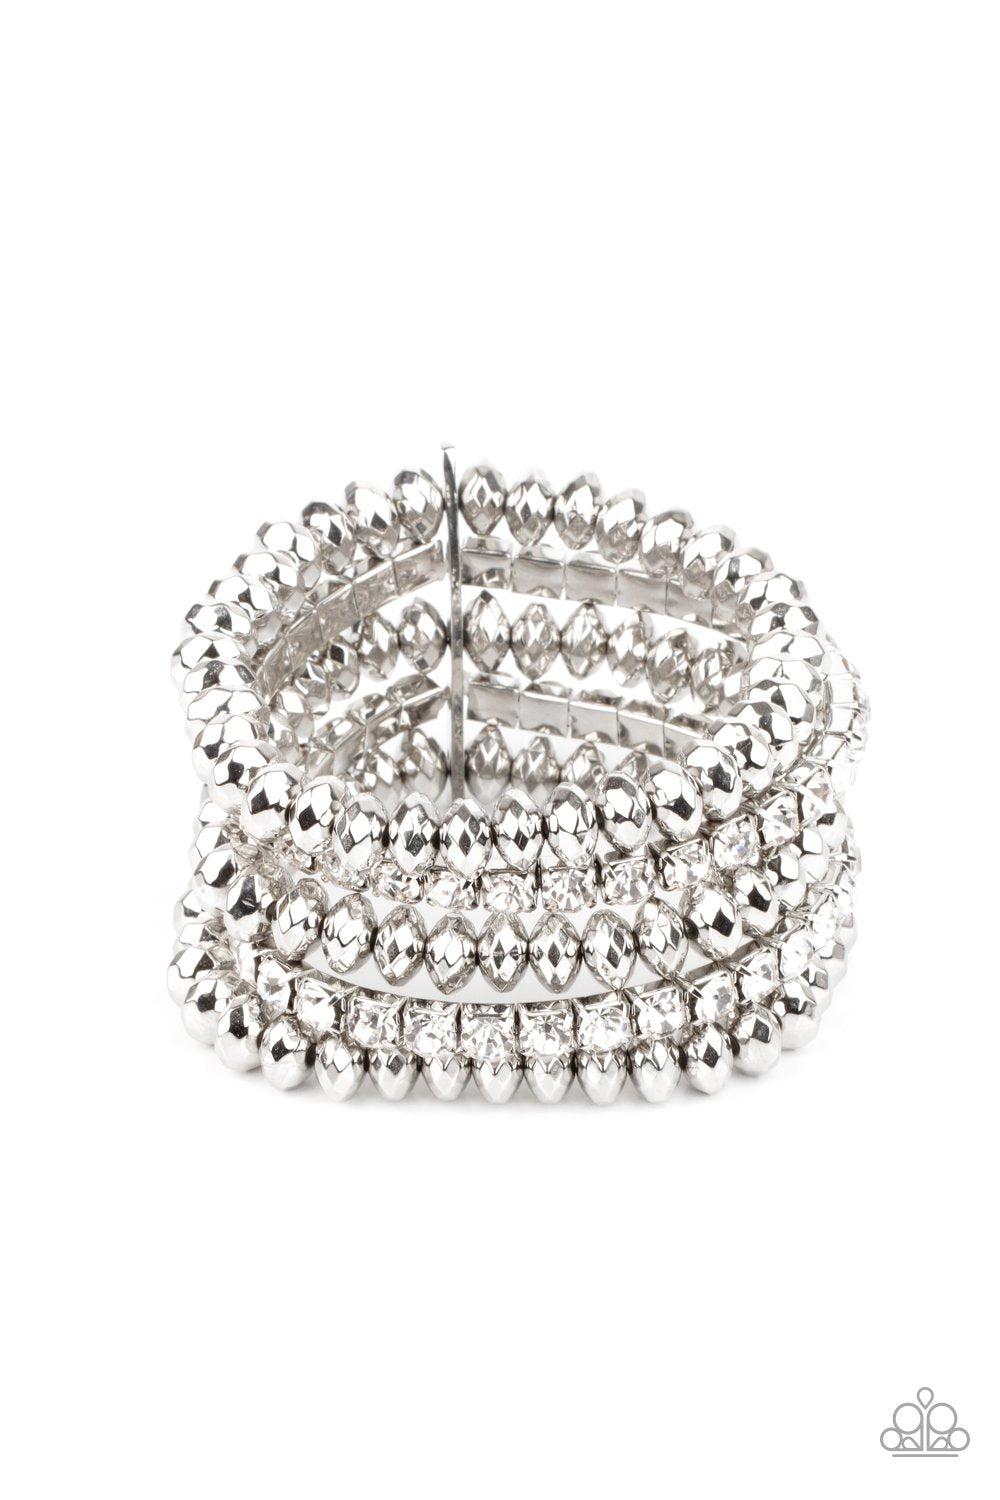 Best of LUXE White Rhinestone and Silver Stacked Bracelet - Paparazzi Accessories LOTP Exclusive March 2021 - lightbox -CarasShop.com - $5 Jewelry by Cara Jewels